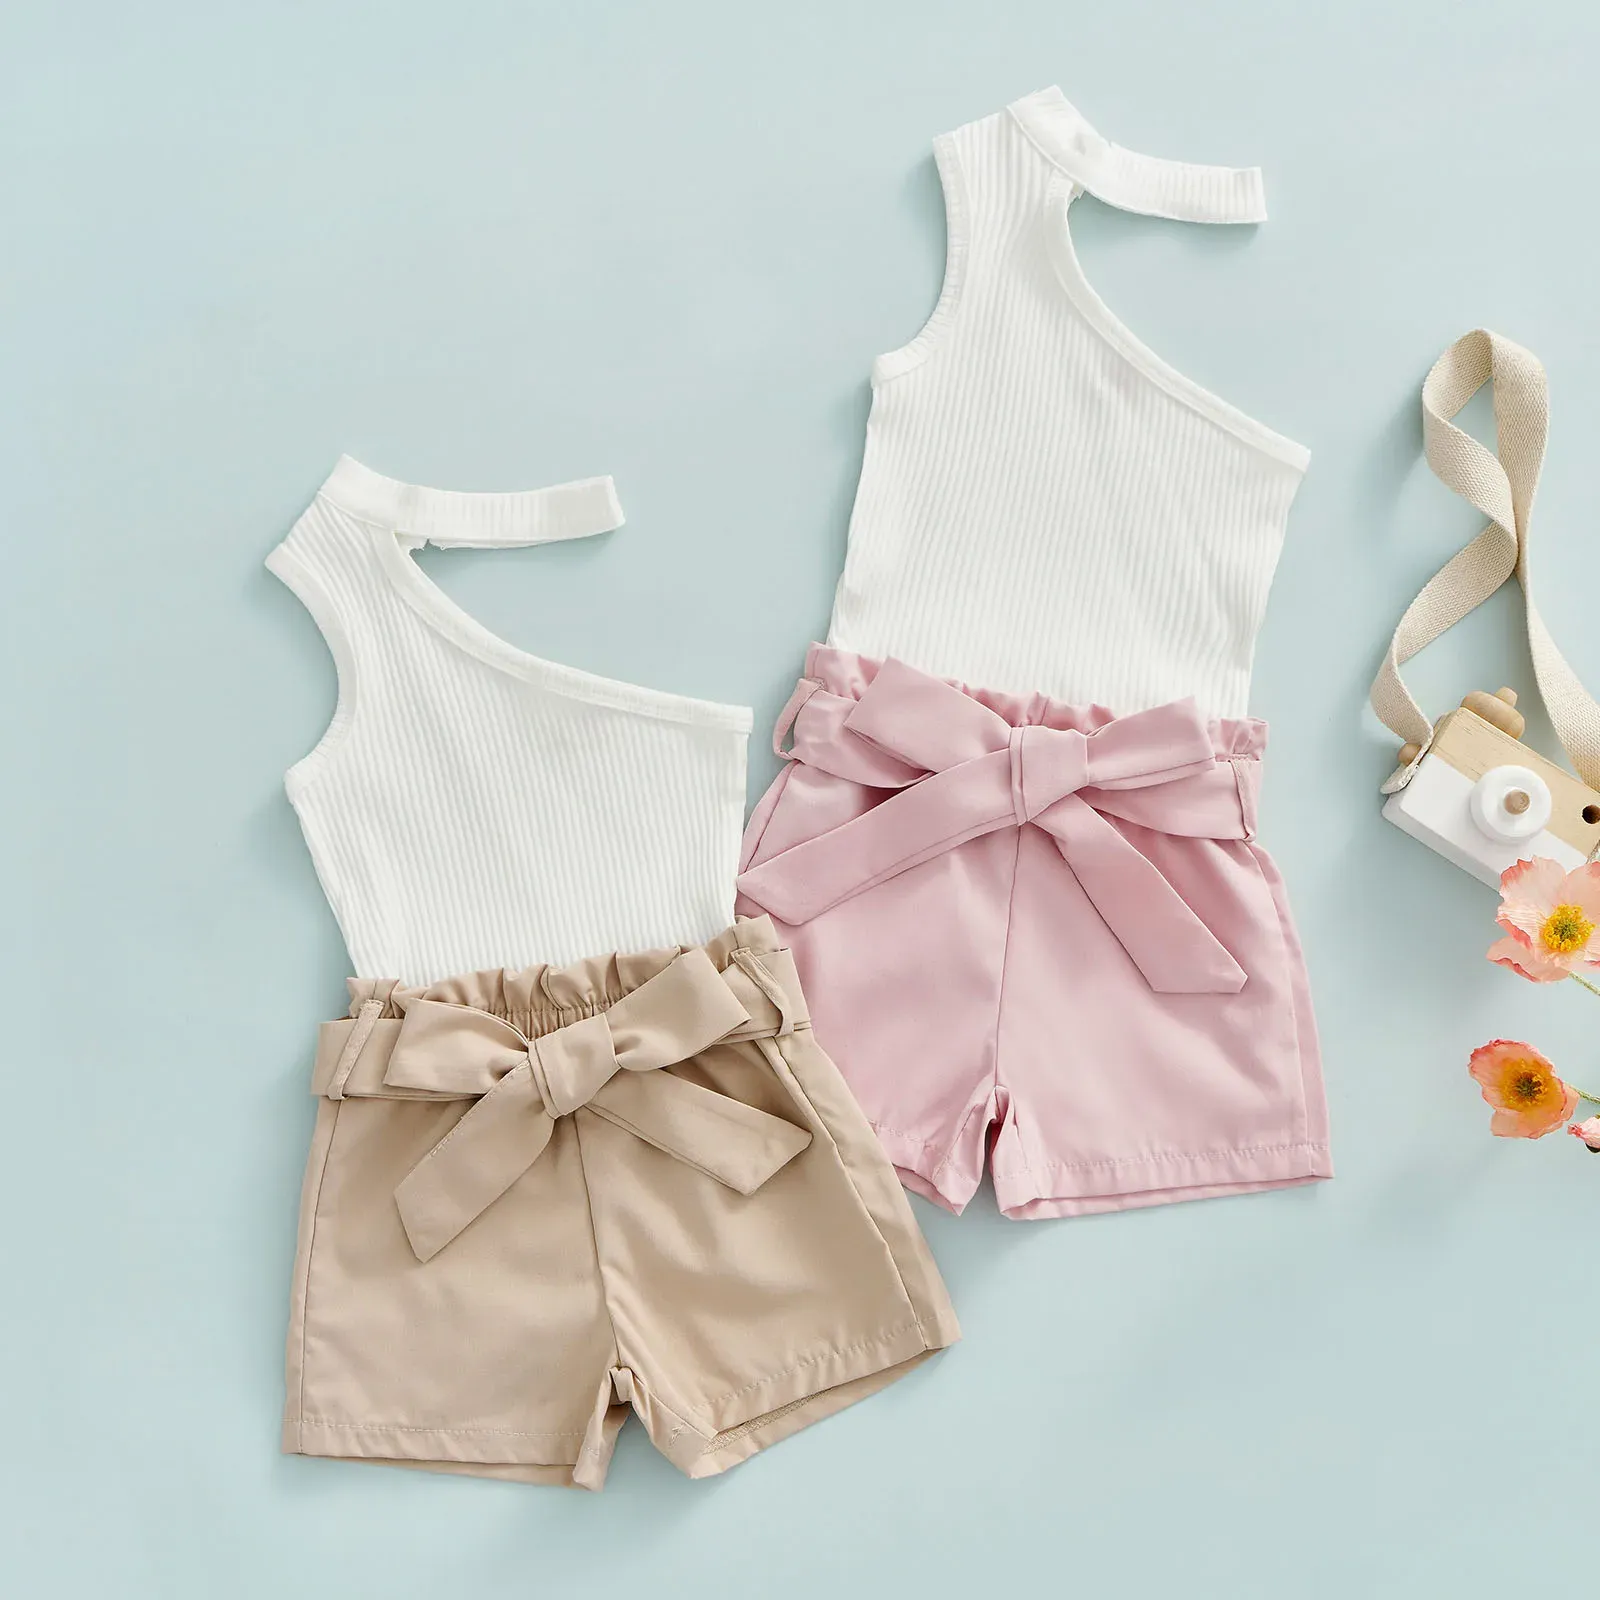 Shorts Mababy 6m4y Toddler Kid Baby Girls Vêtements Set One épaule Tops Bow Shorts Fashion Summer Tenues D01